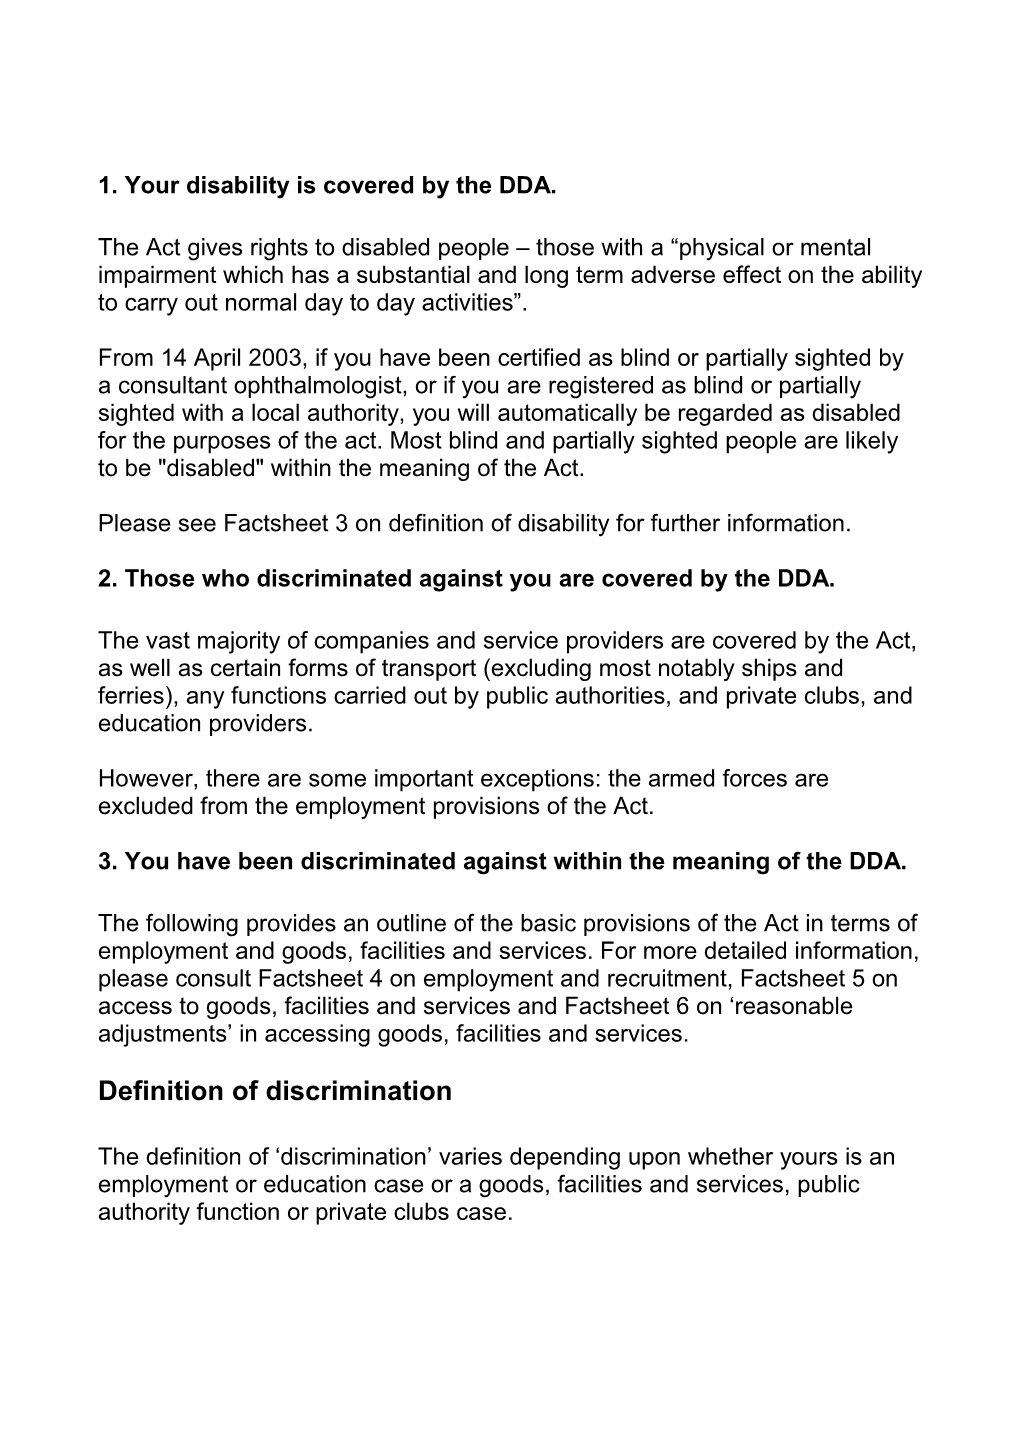 DDA Factsheet 12: What You Can Do If You Experience Discrimination